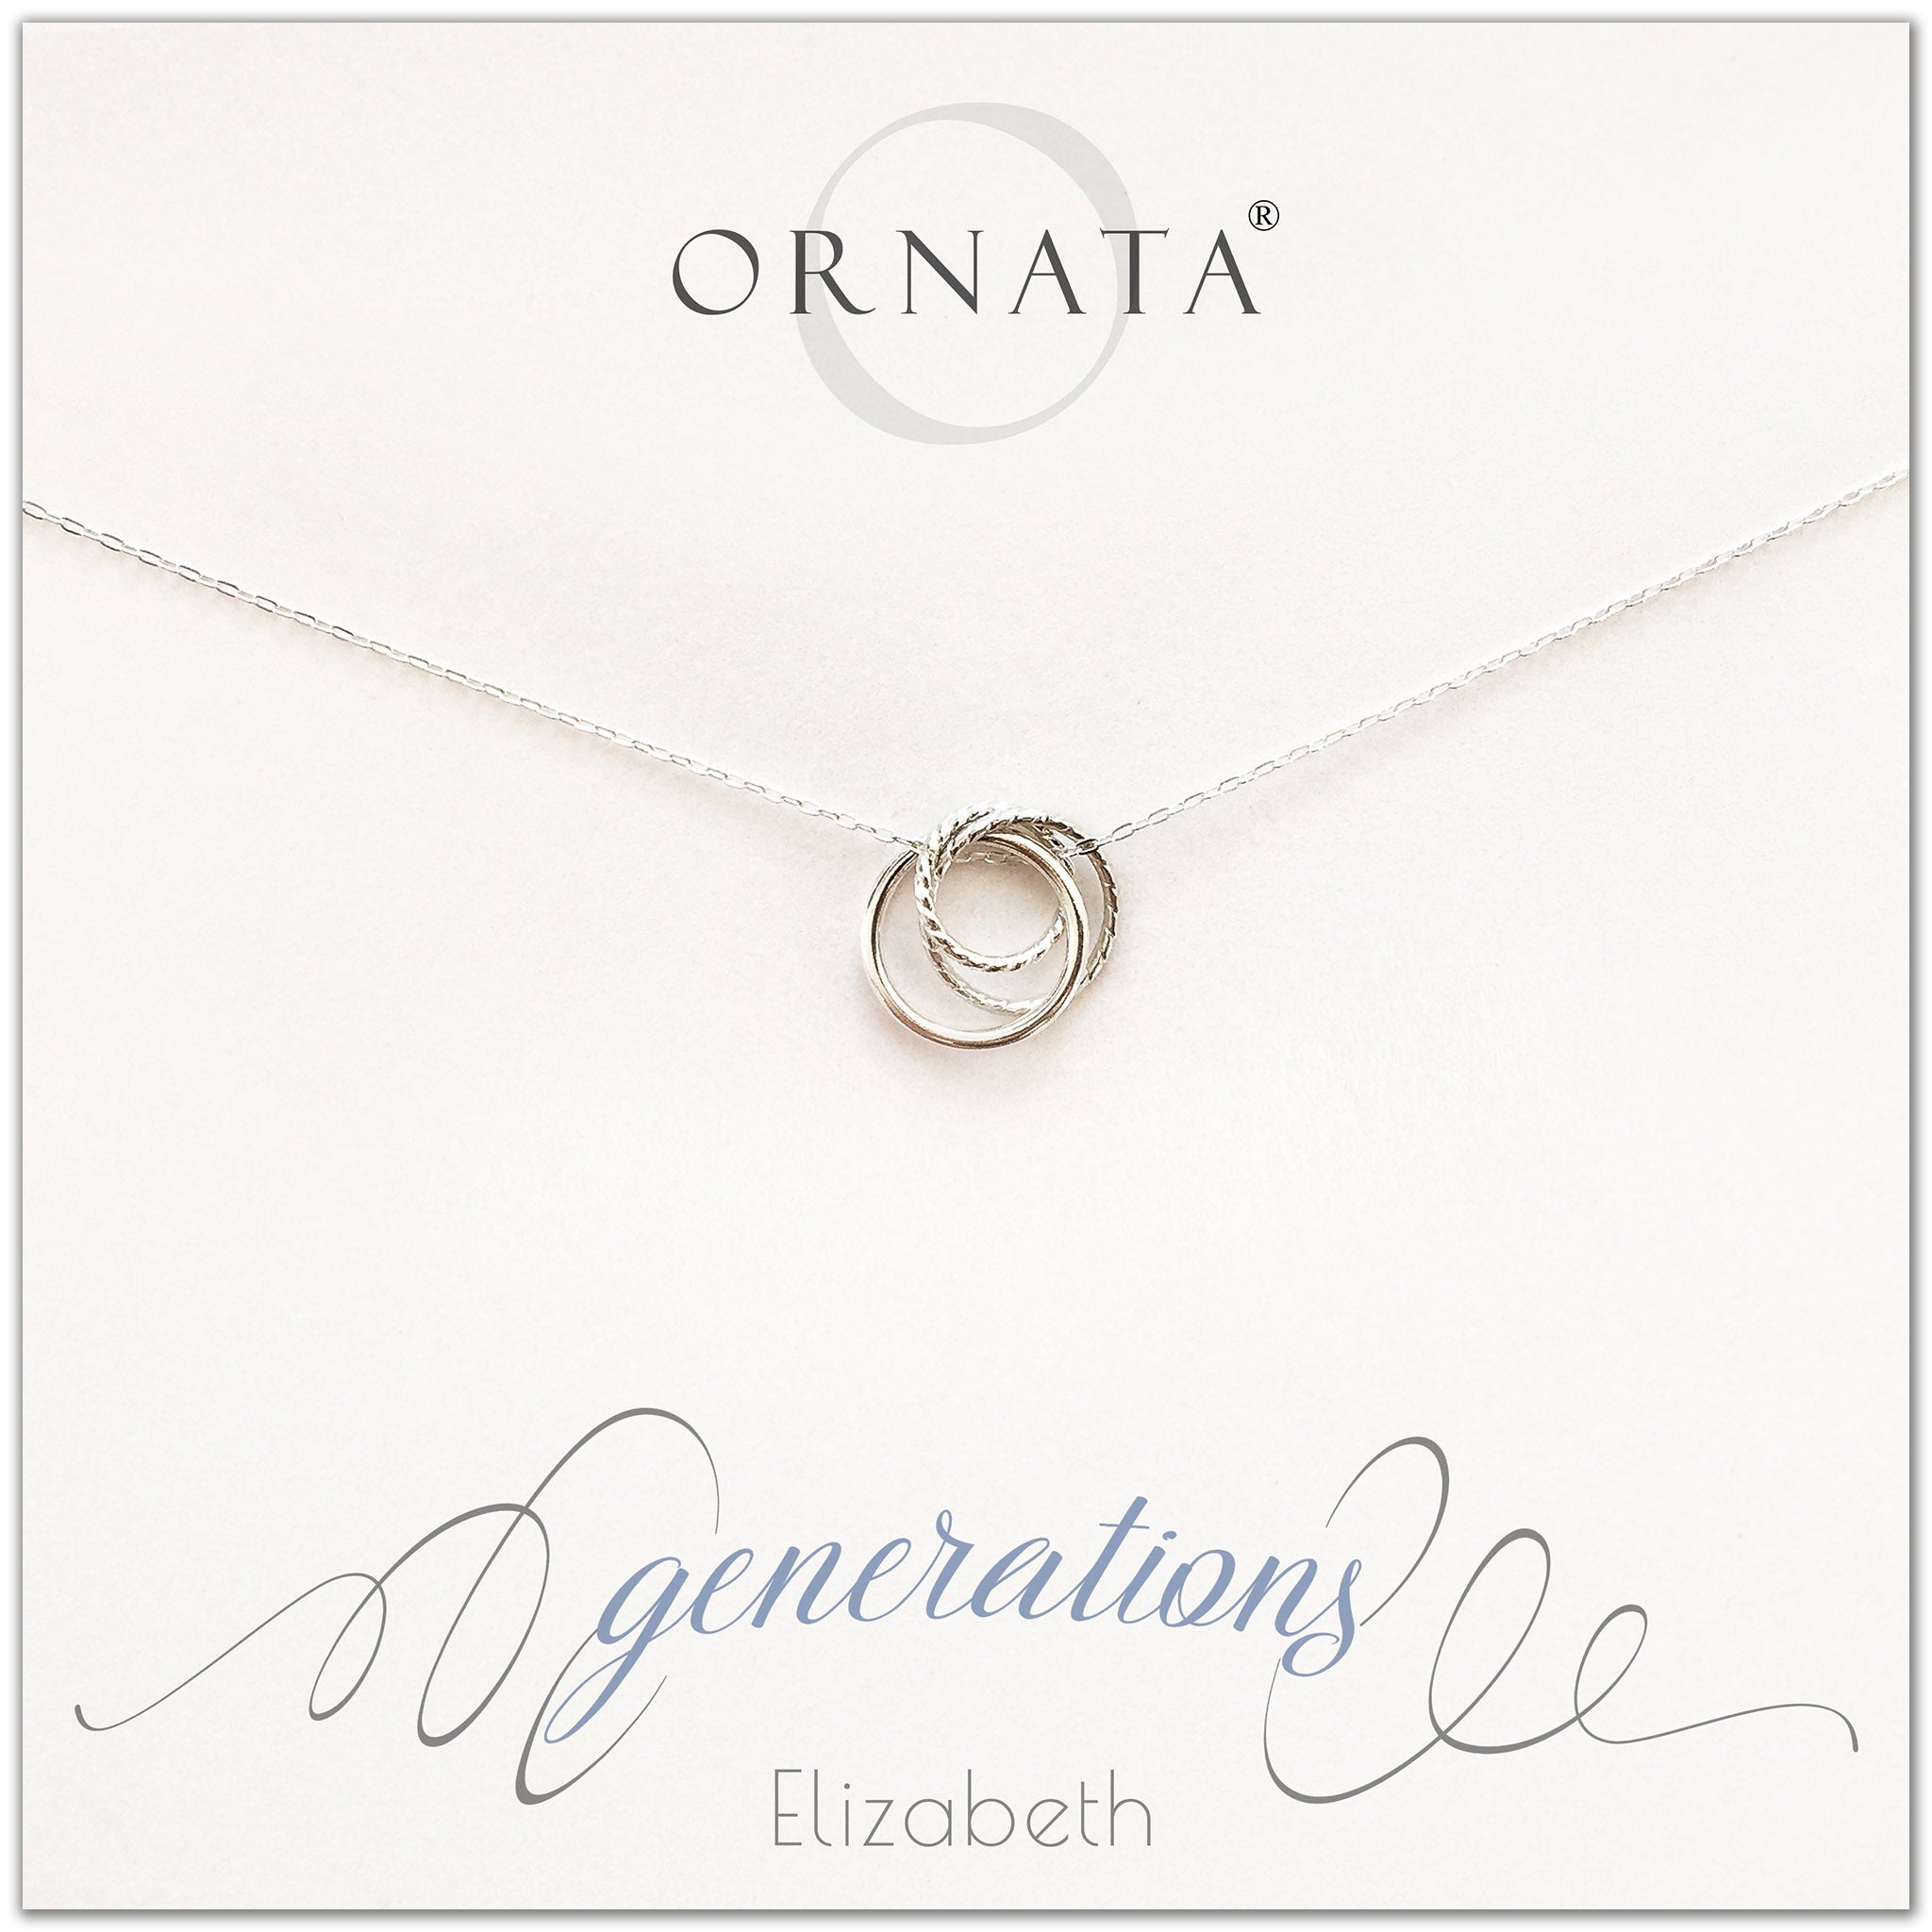 “Generations” Sterling Silver Necklace on Personalized Jewelry Card | 2021 Edition